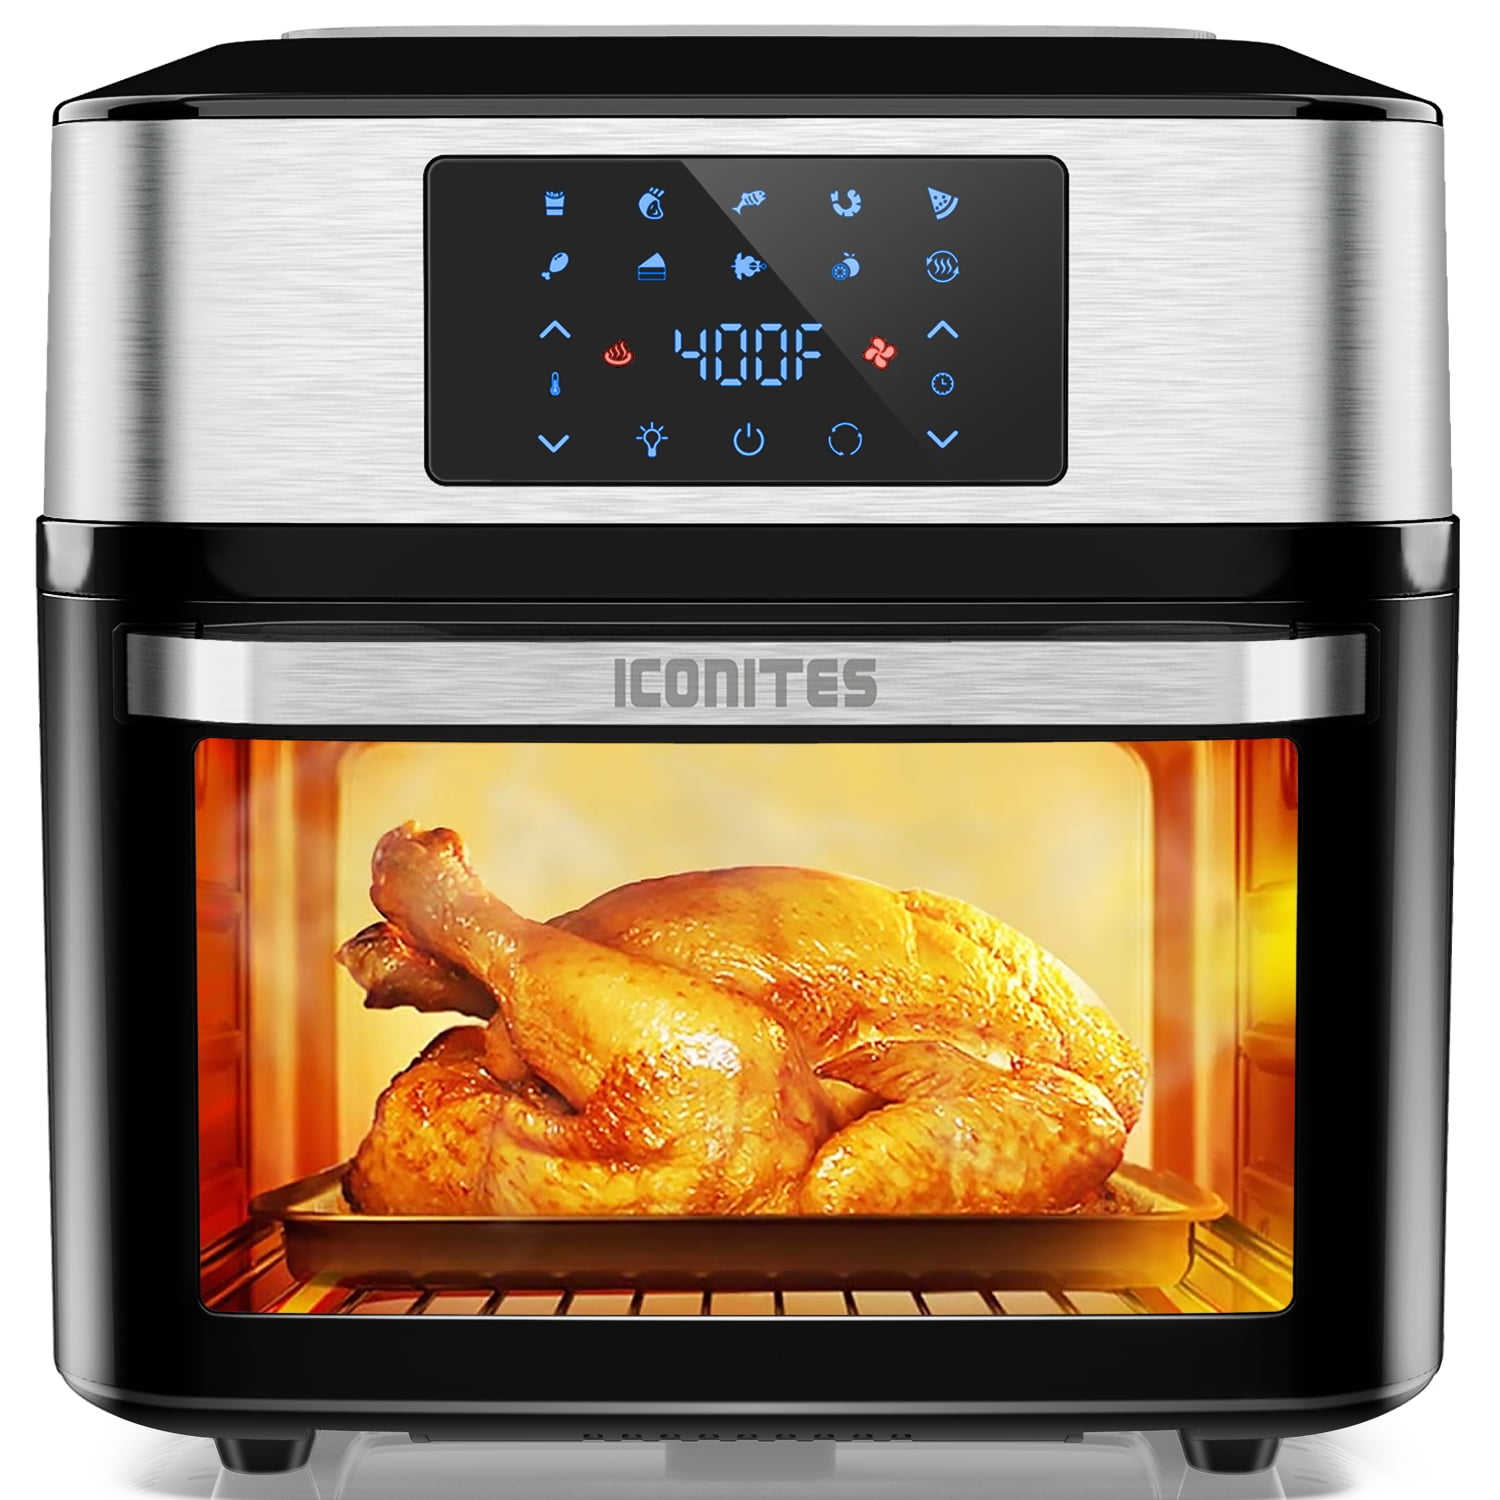 Iconites 20 Quart Air Fryer 10-in-1 Toaster Oven AO1202K with Rotisserie  Black Airfryer on Sale 20 qt - Walmart.com